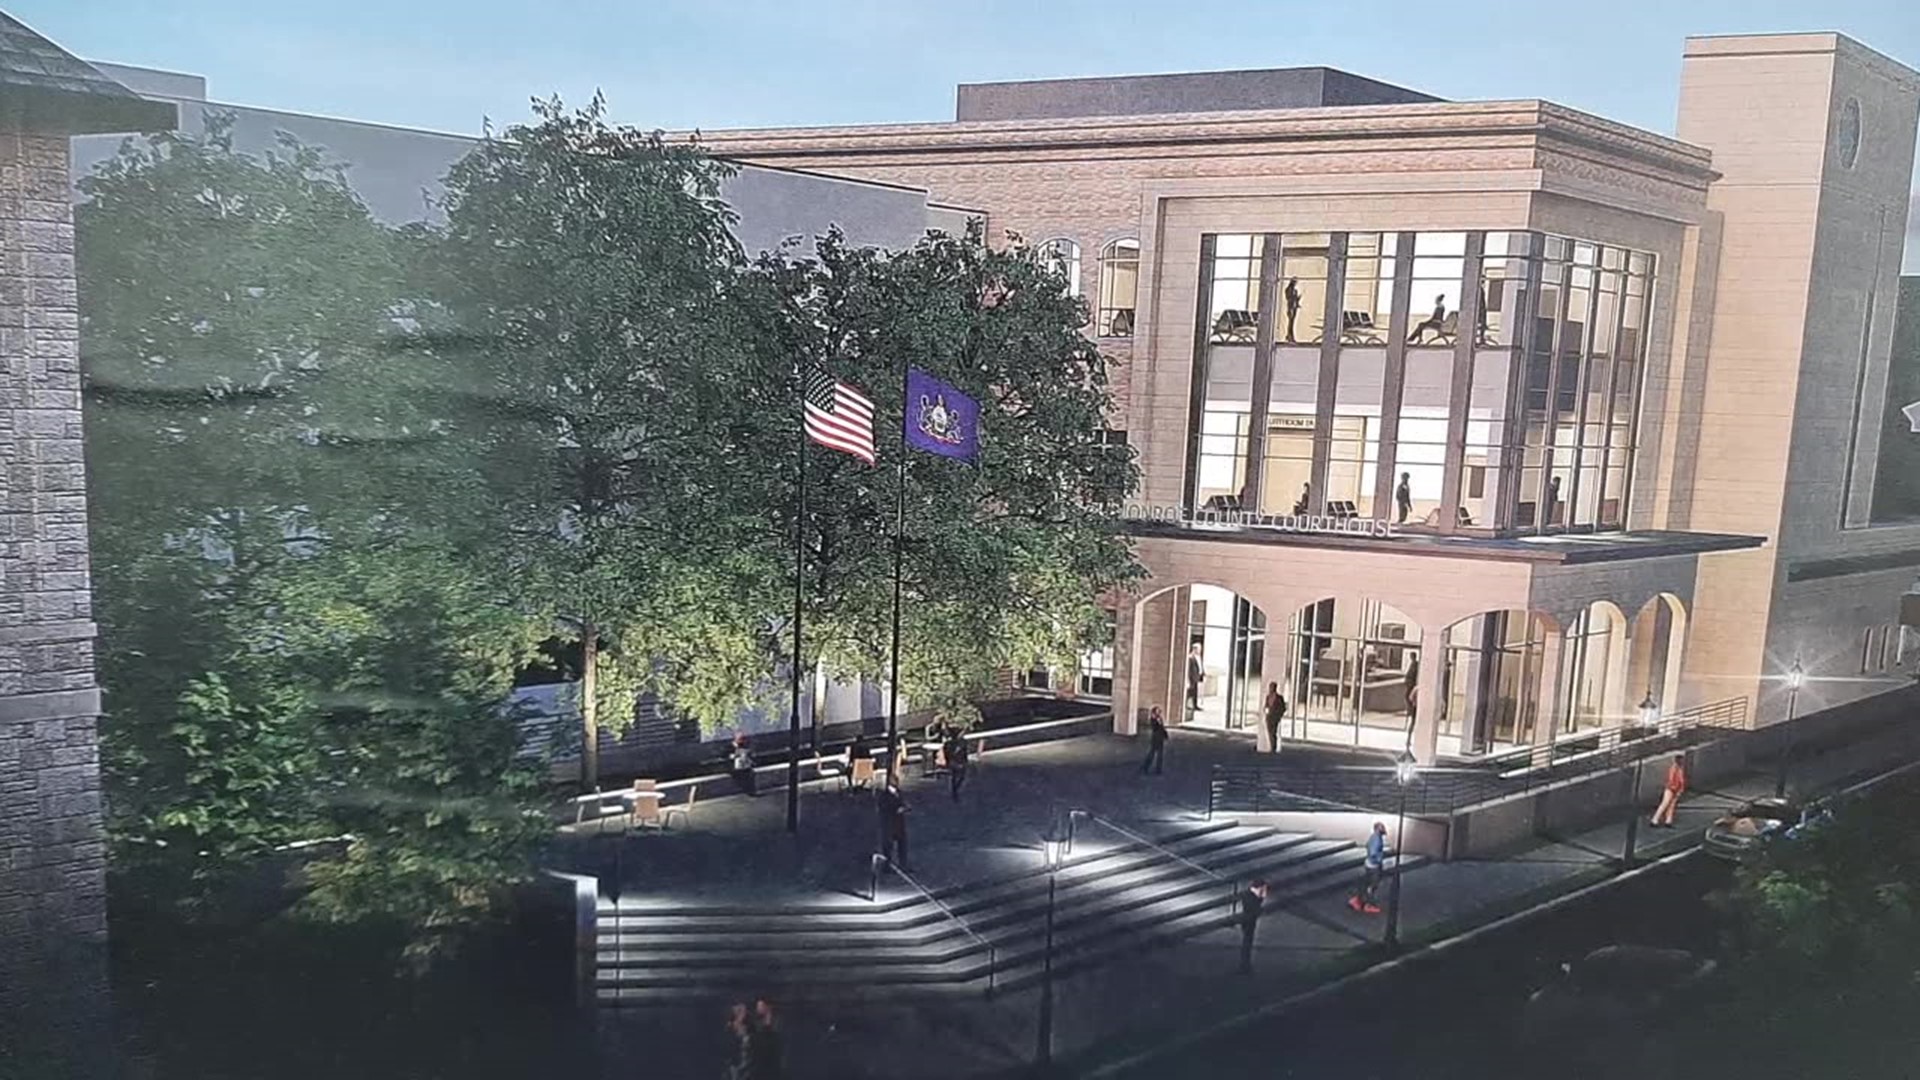 Renderings of the multi-million dollar project were released by the county commissioners.